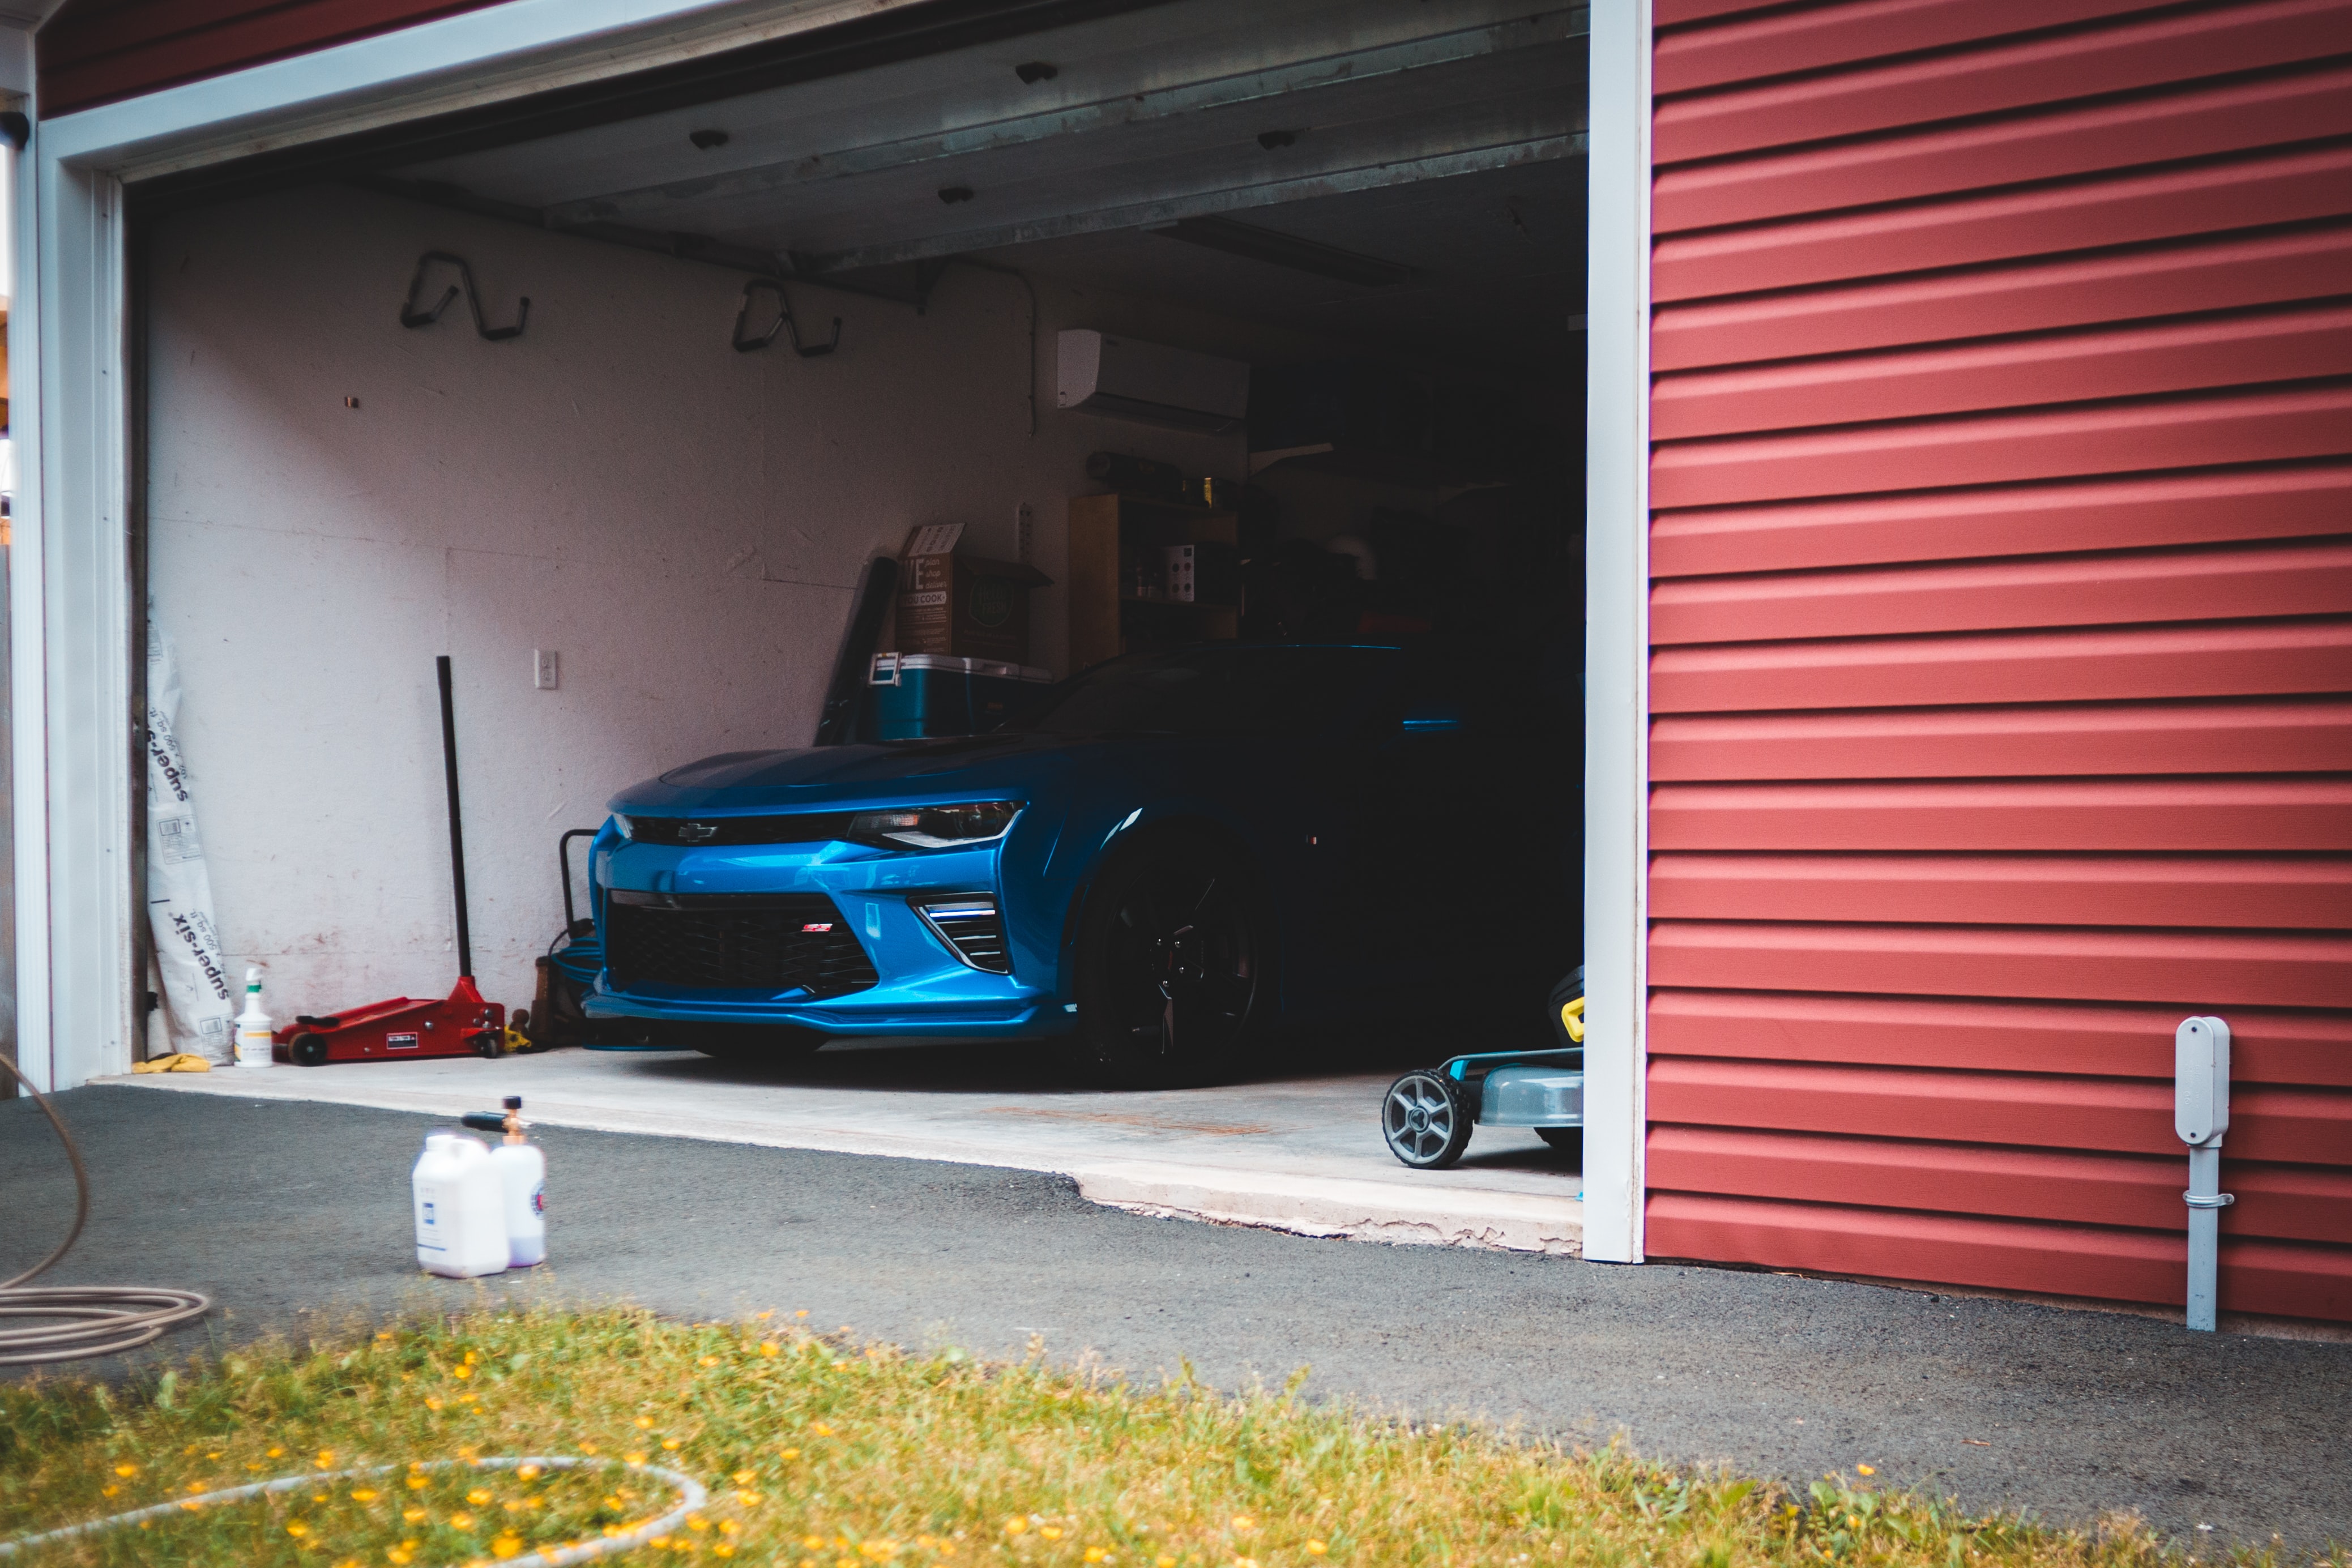 Things You Should Never Keep In Your Garage